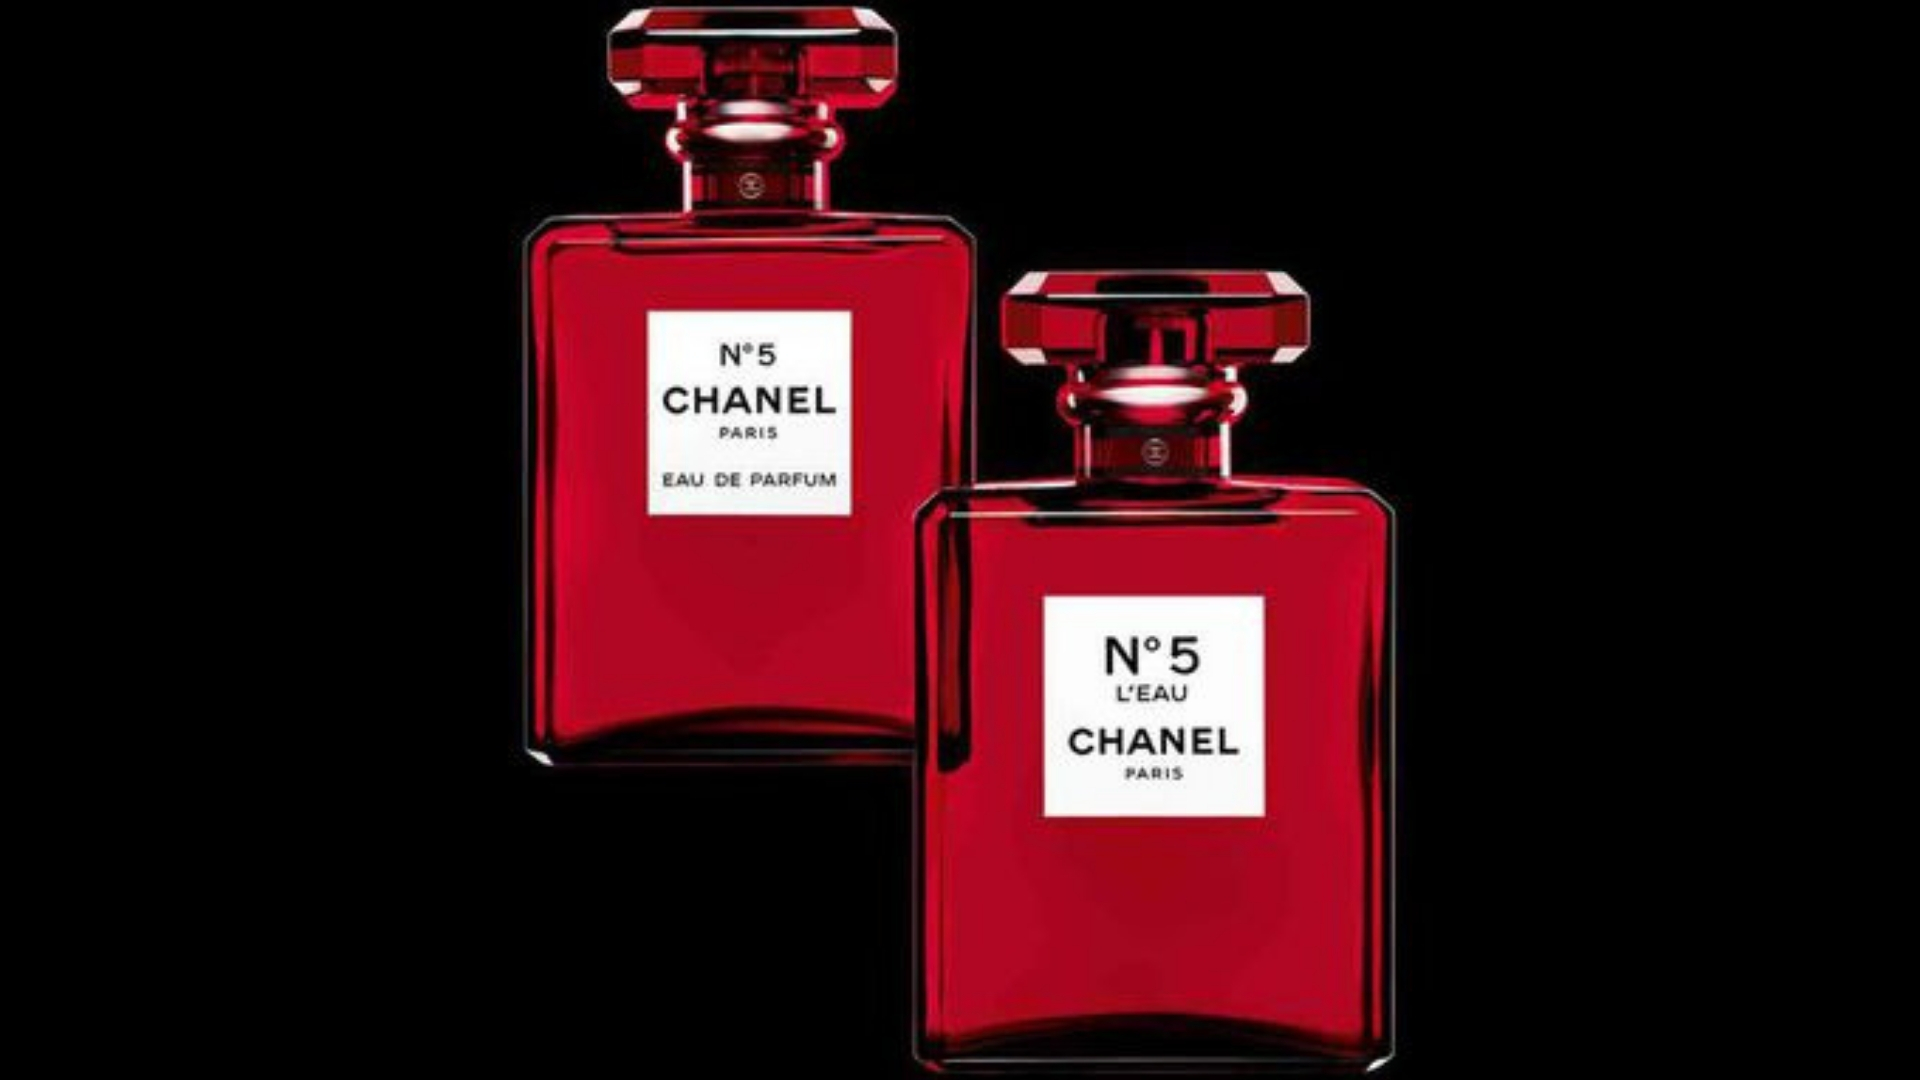 A travel-sized bottle for Chanel's iconic N°5 fragrance